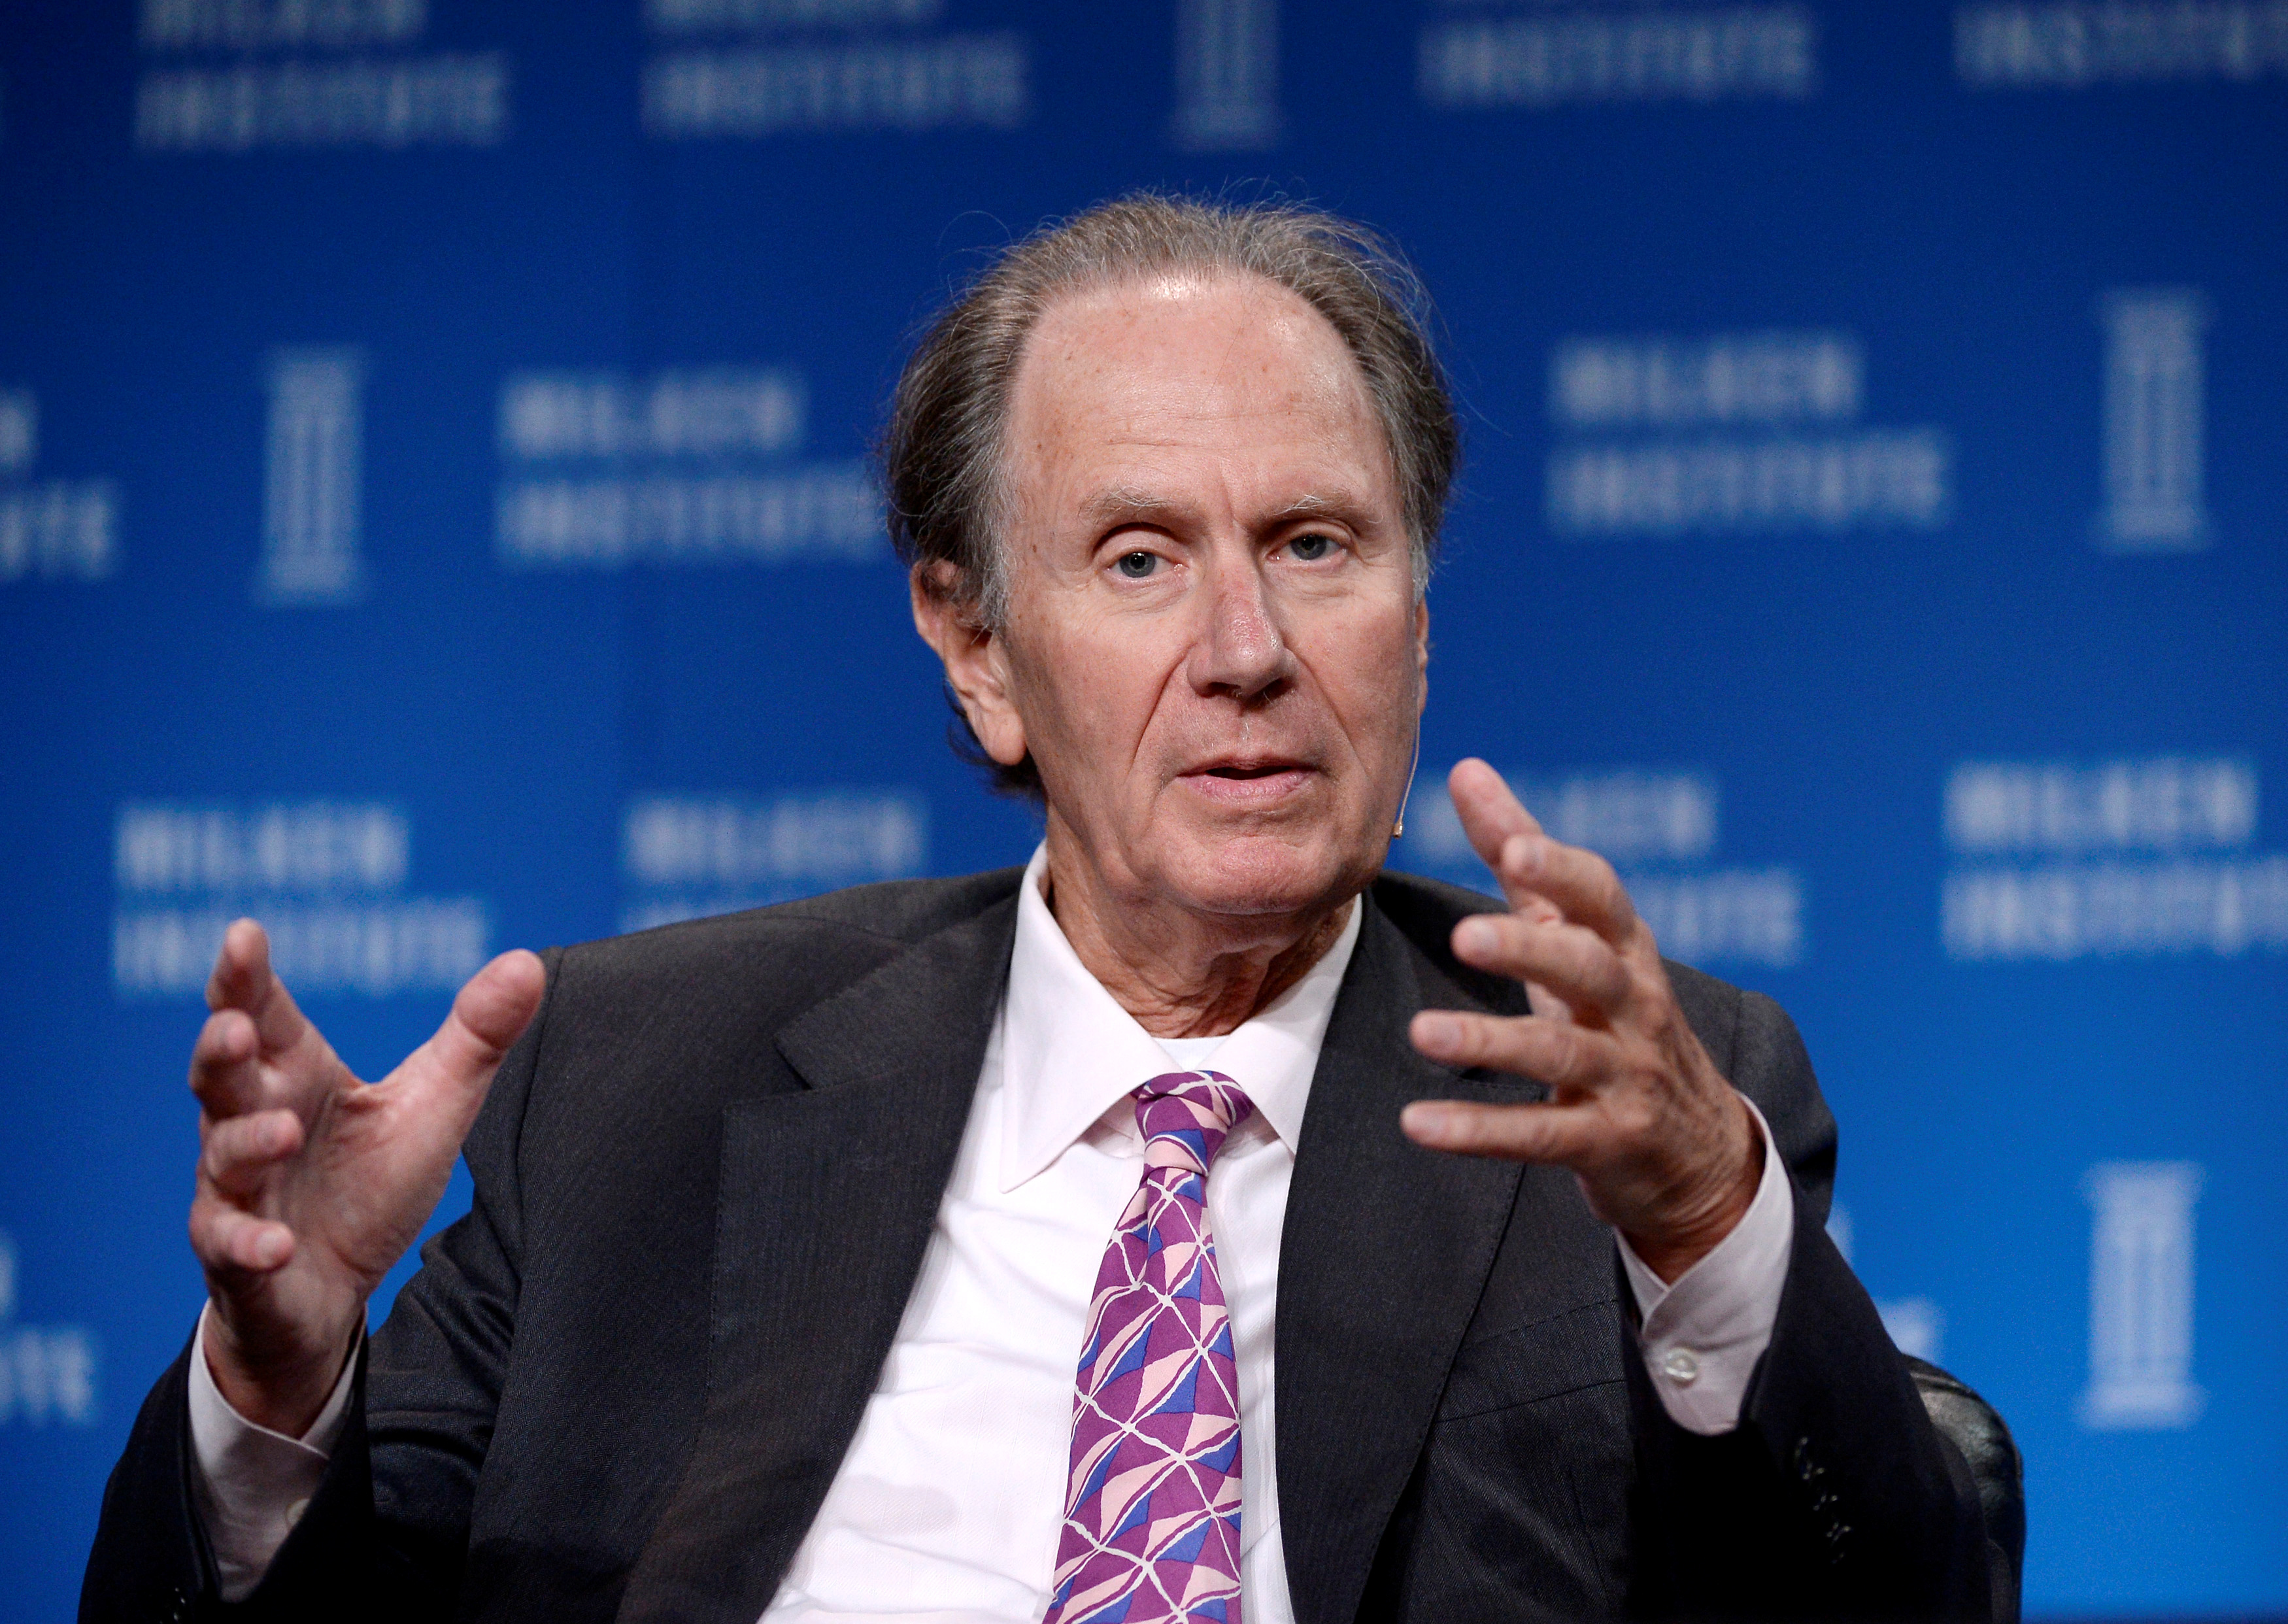 FILE PHOTO - David Bonderman, Founding Partner, TPG, takes part in Private Equity: Rebalancing Risk session during the 2014 Milken Institute Global Conference in Beverly Hills